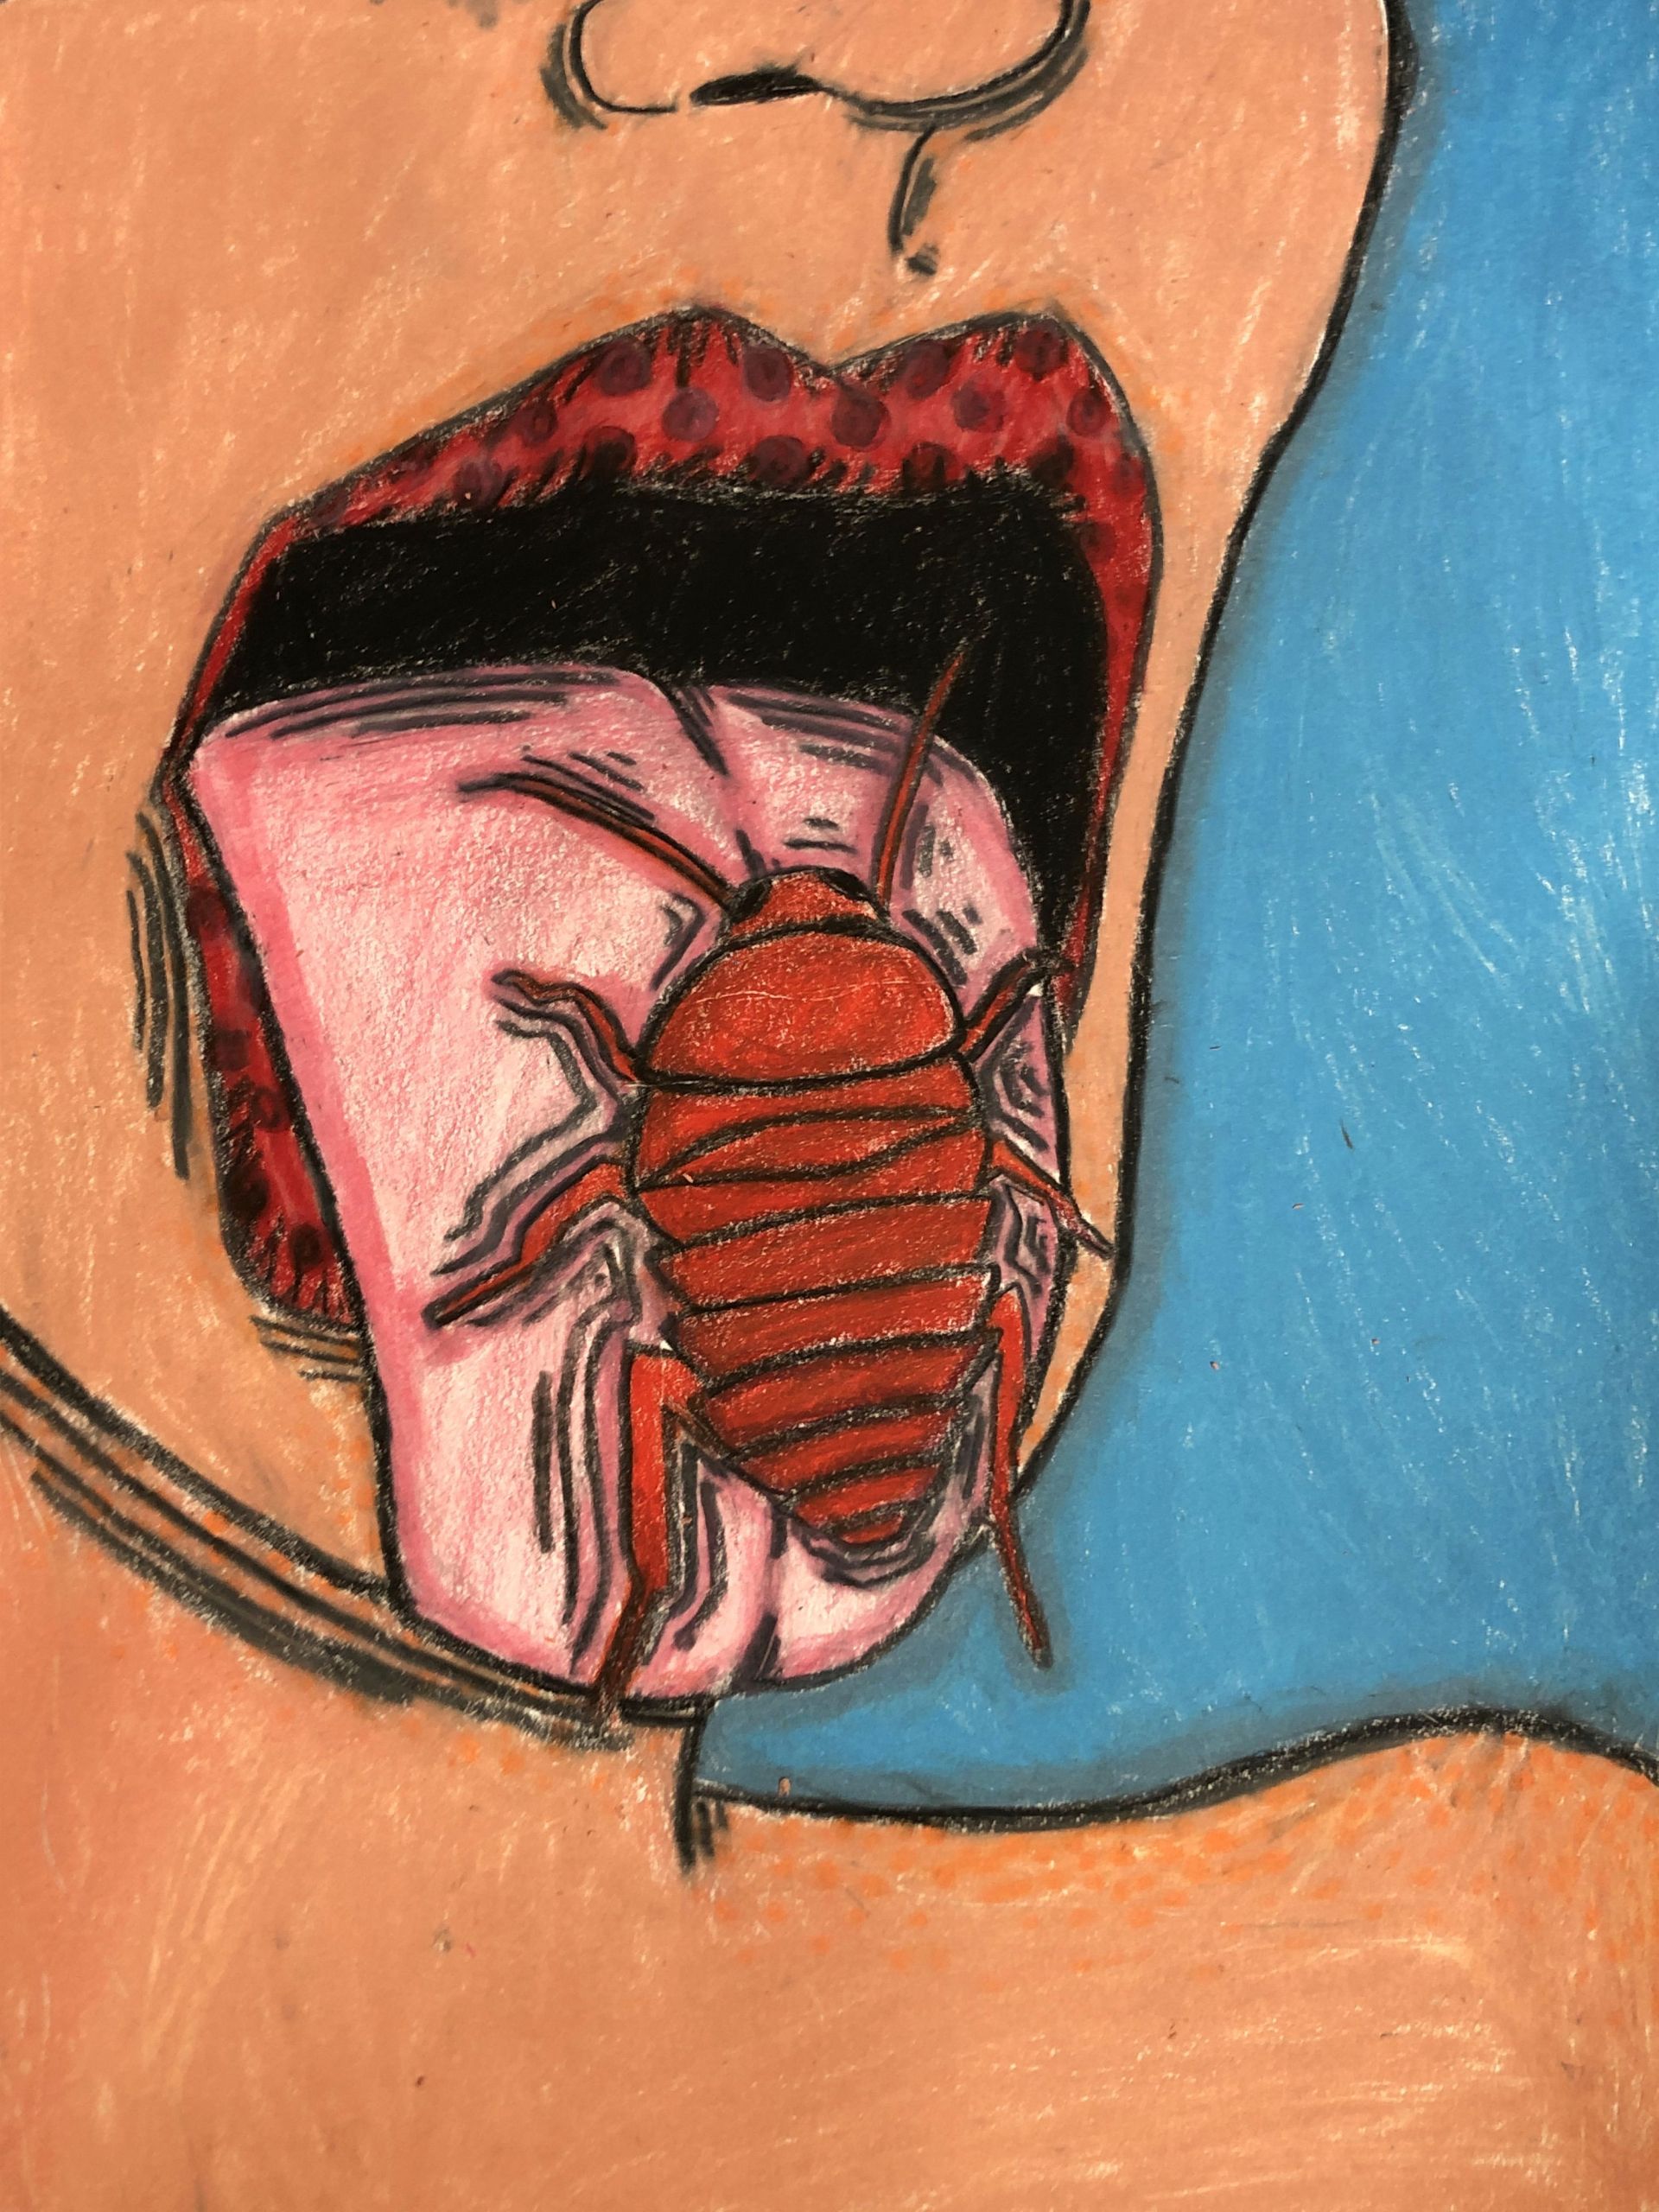 Cockroach Drawing Easy My Art This is Pop Art Inspired It S A Roach On A tongue